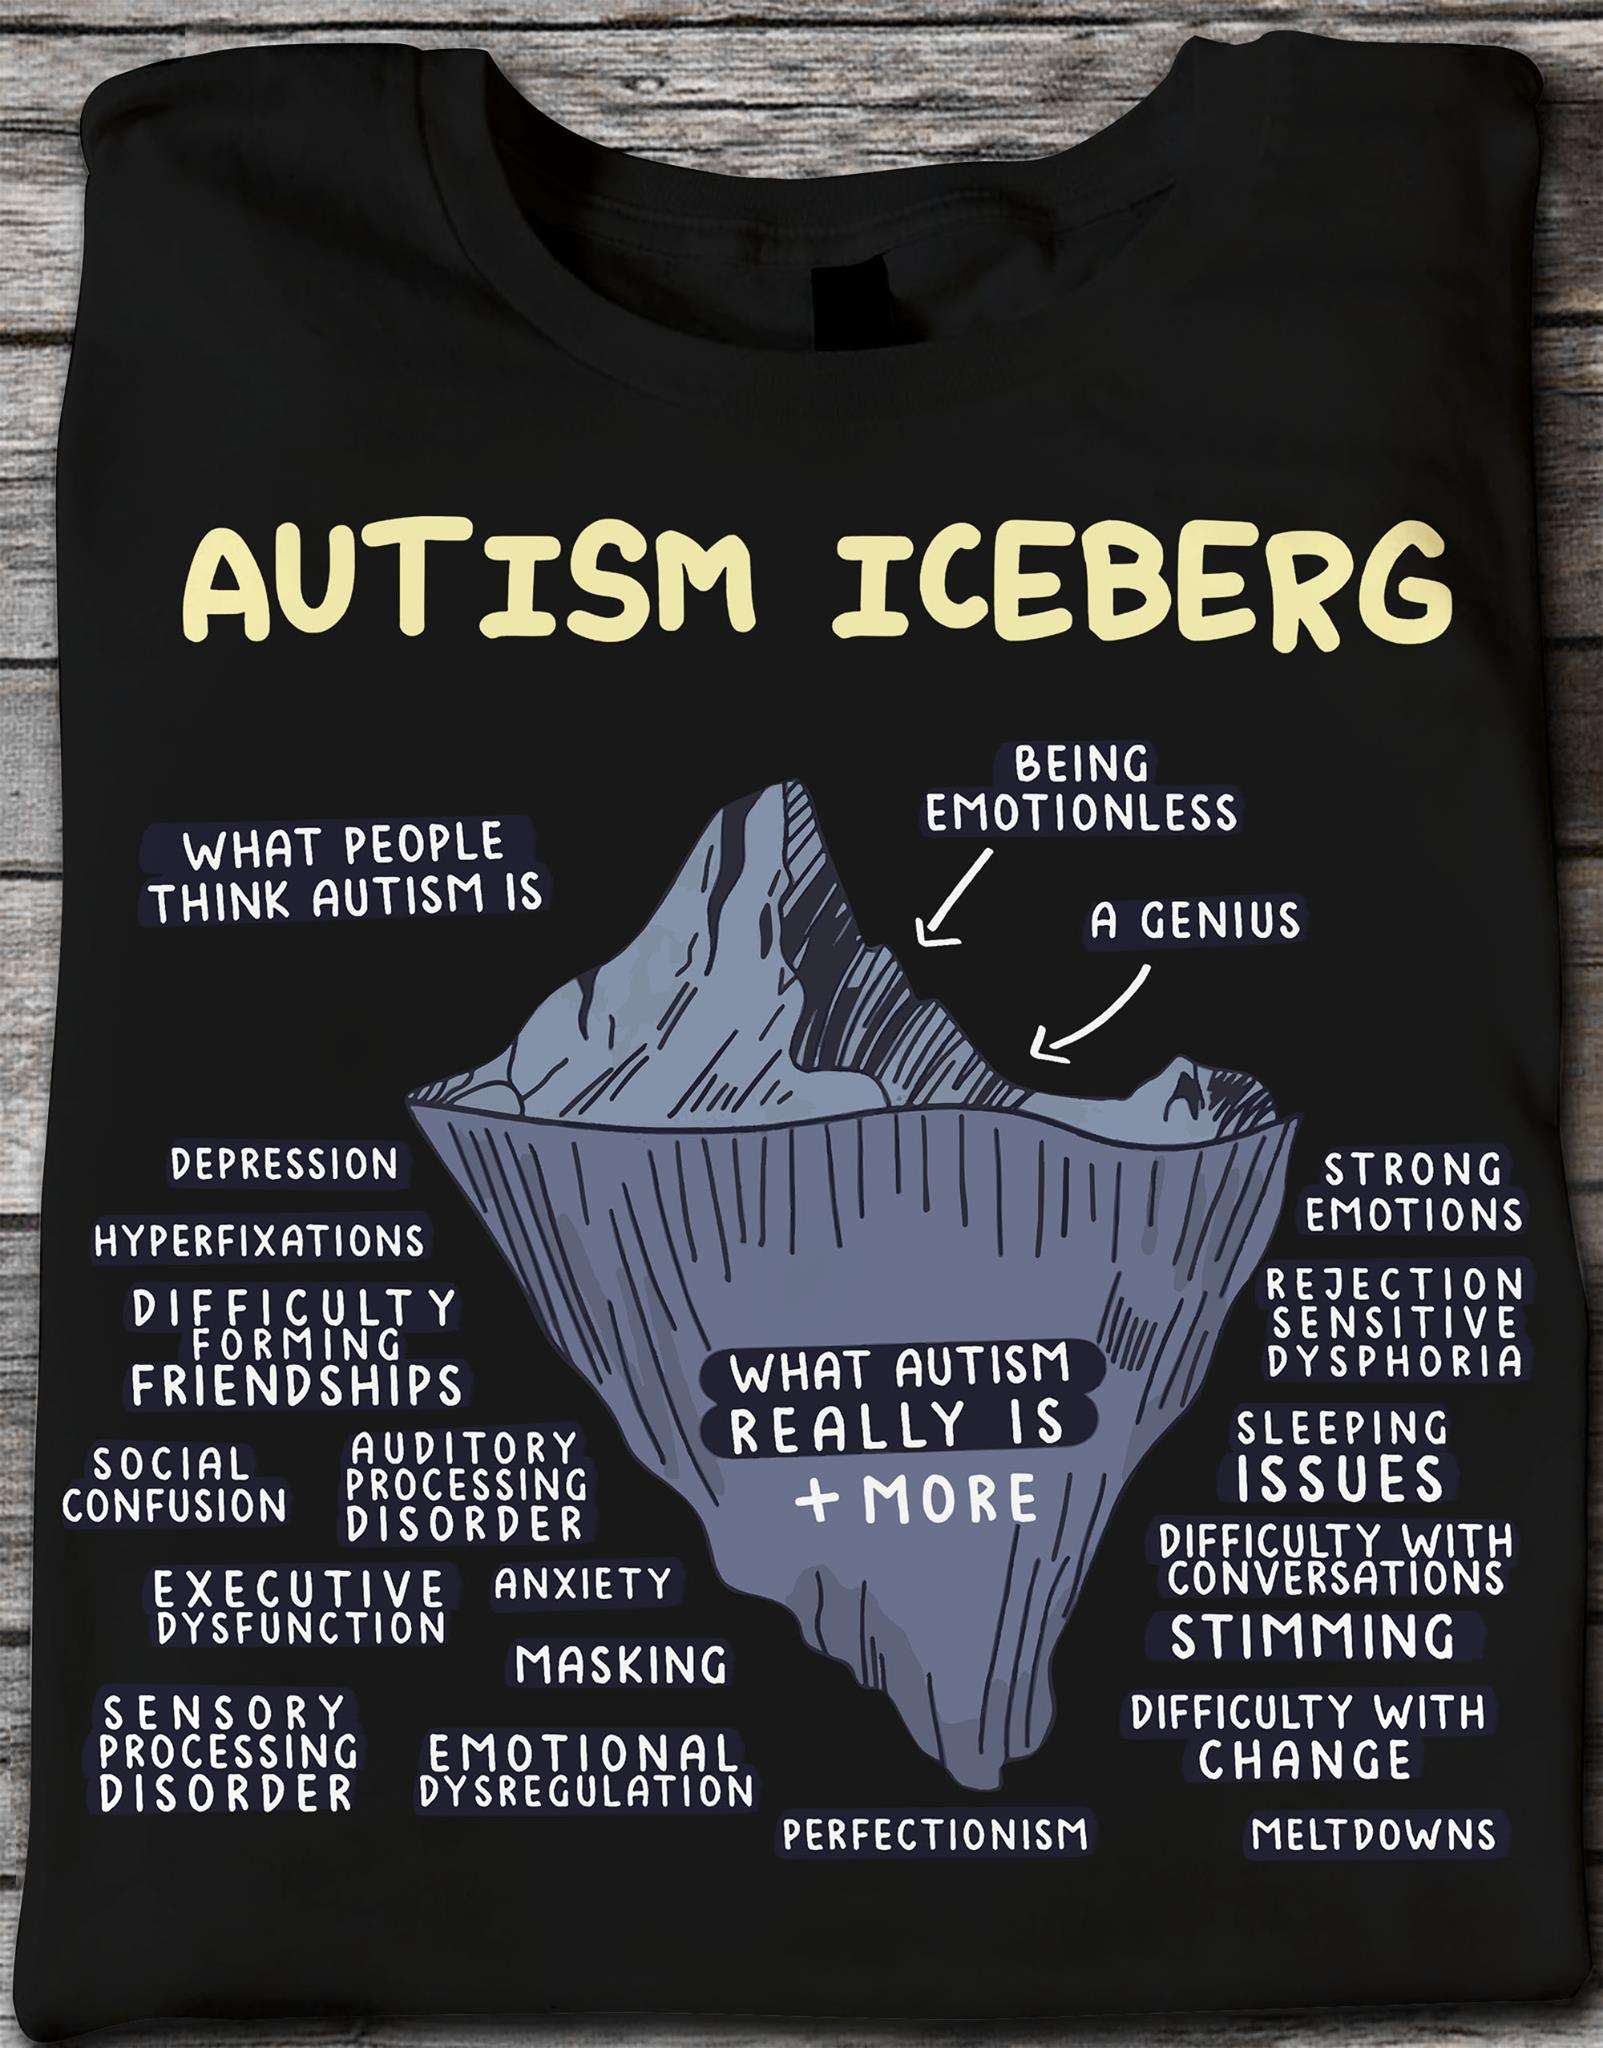 Autism iceberg - Autism awareness, difficulty forming friendships